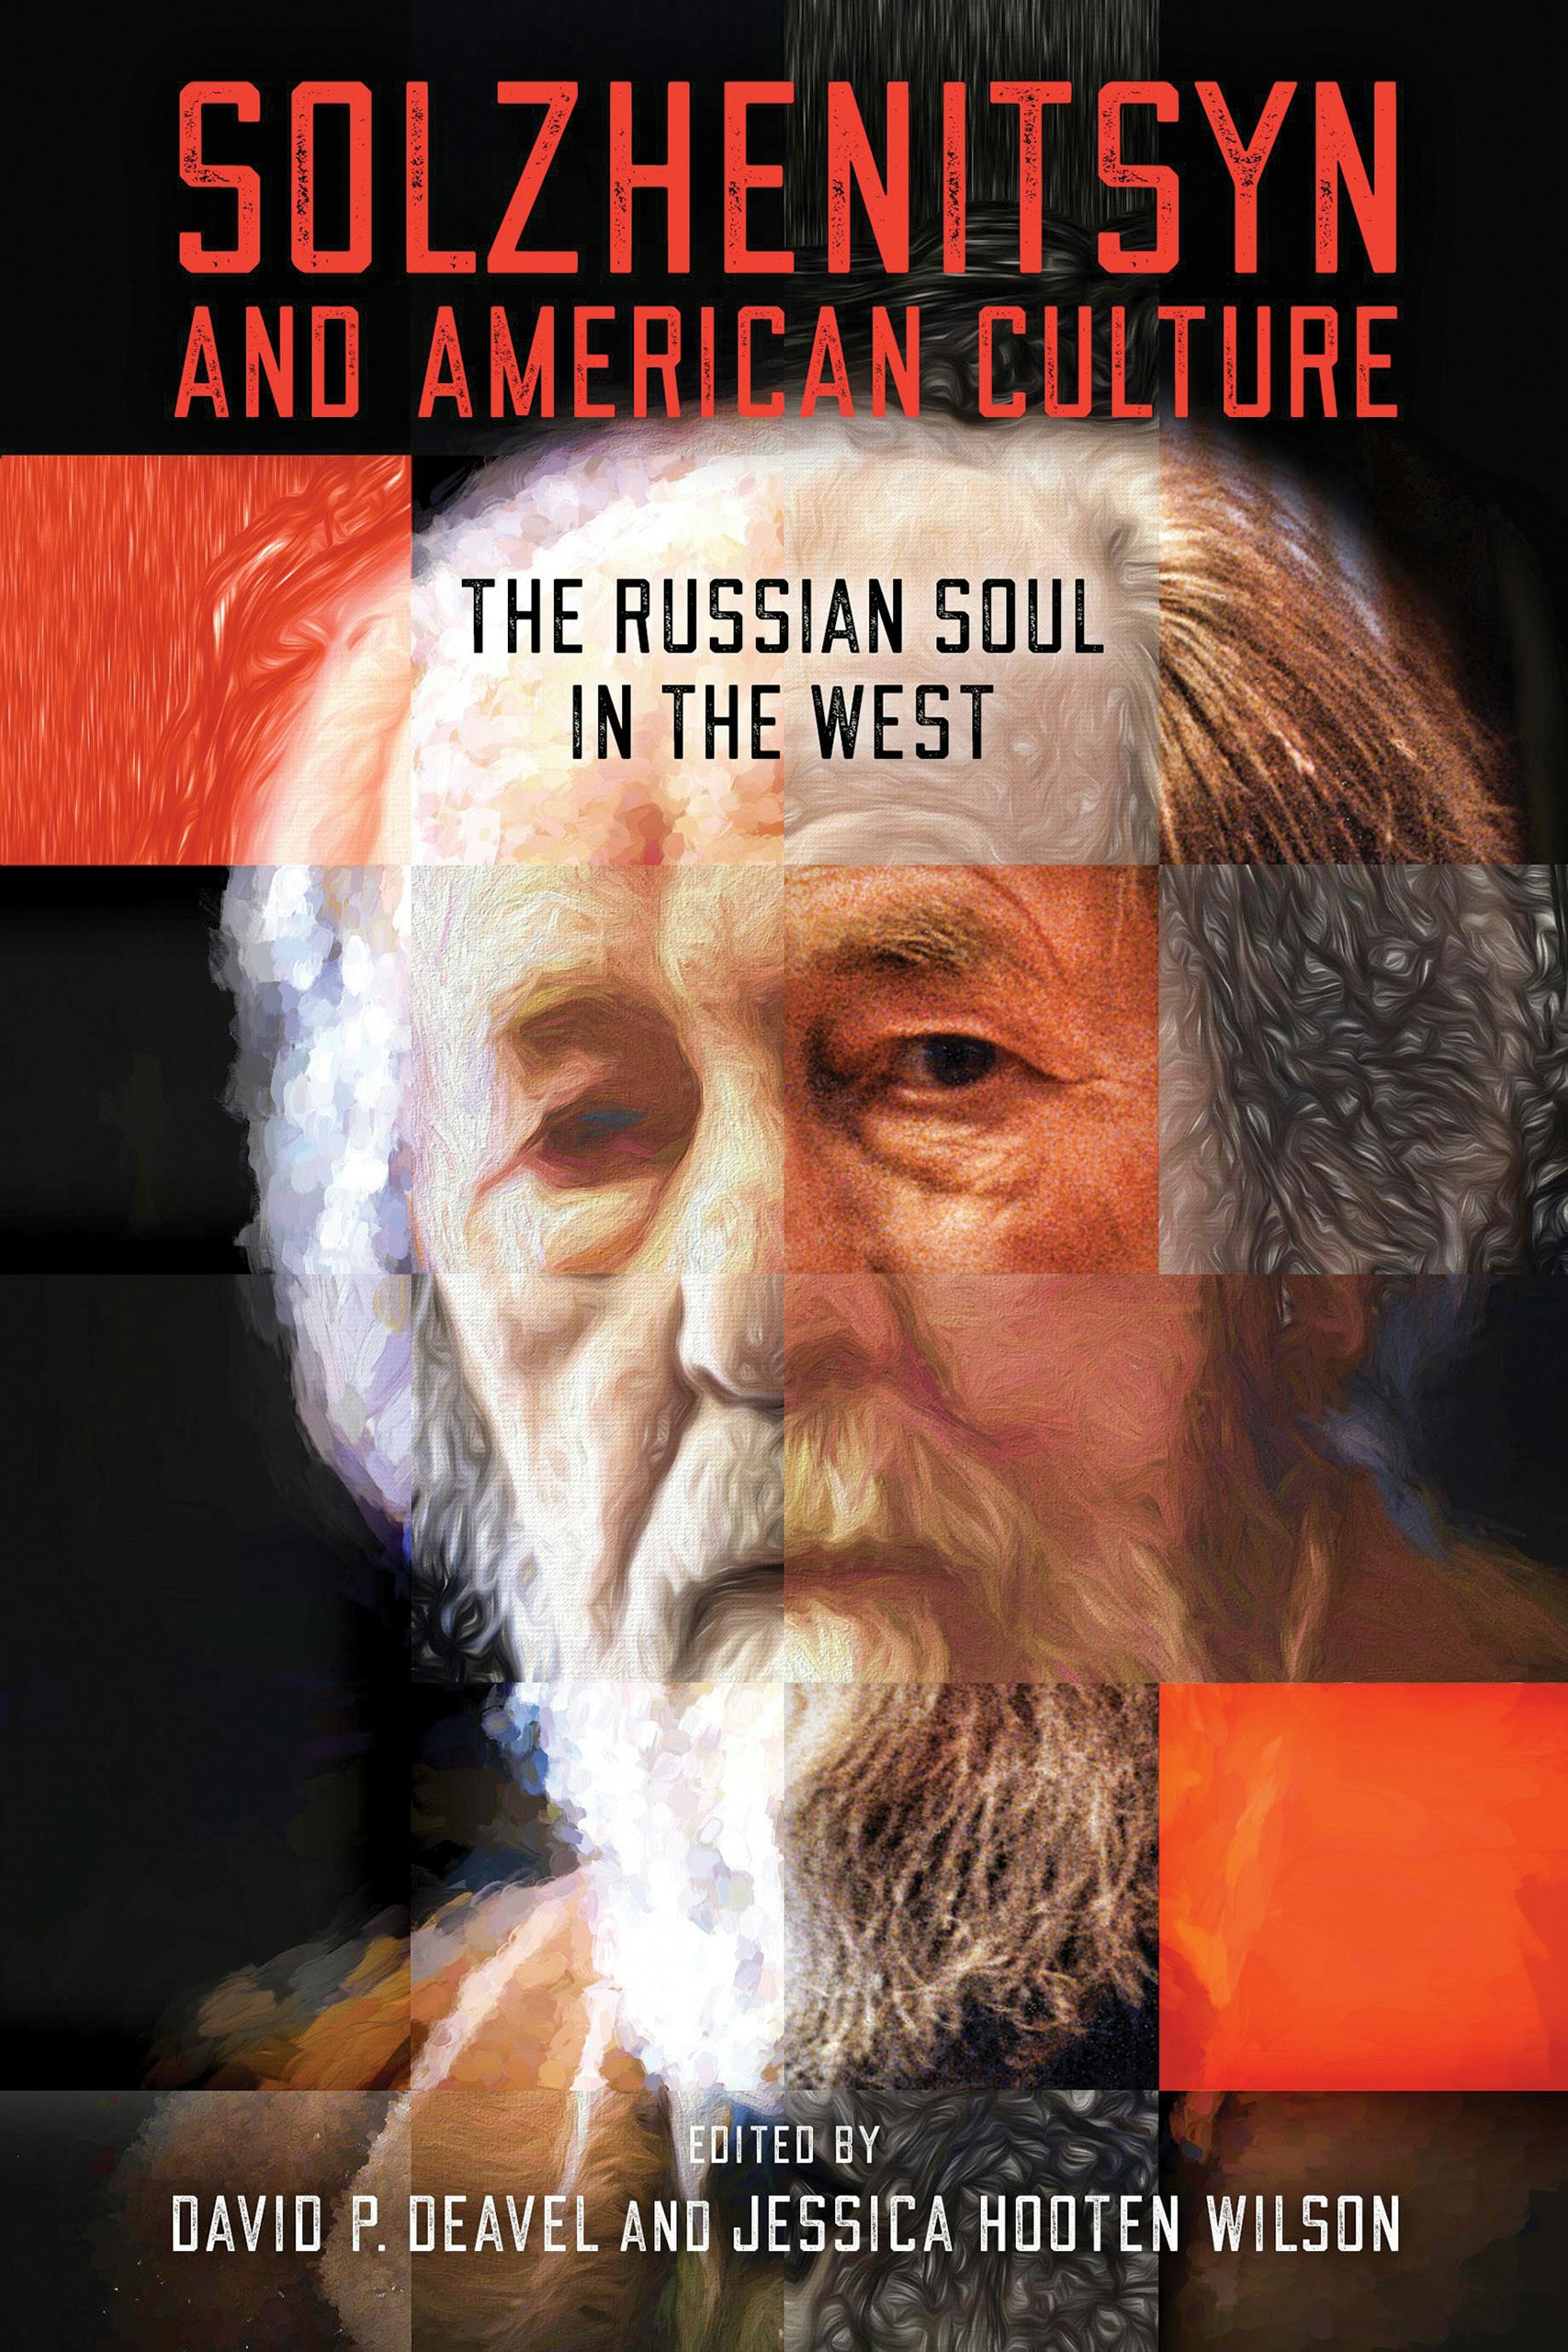 The Center for Ethics and Culture Solzhenitsyn Series Center for Ethics and Culture Solzhenitsyn Node III March 1917: The Red Wheel Book 1